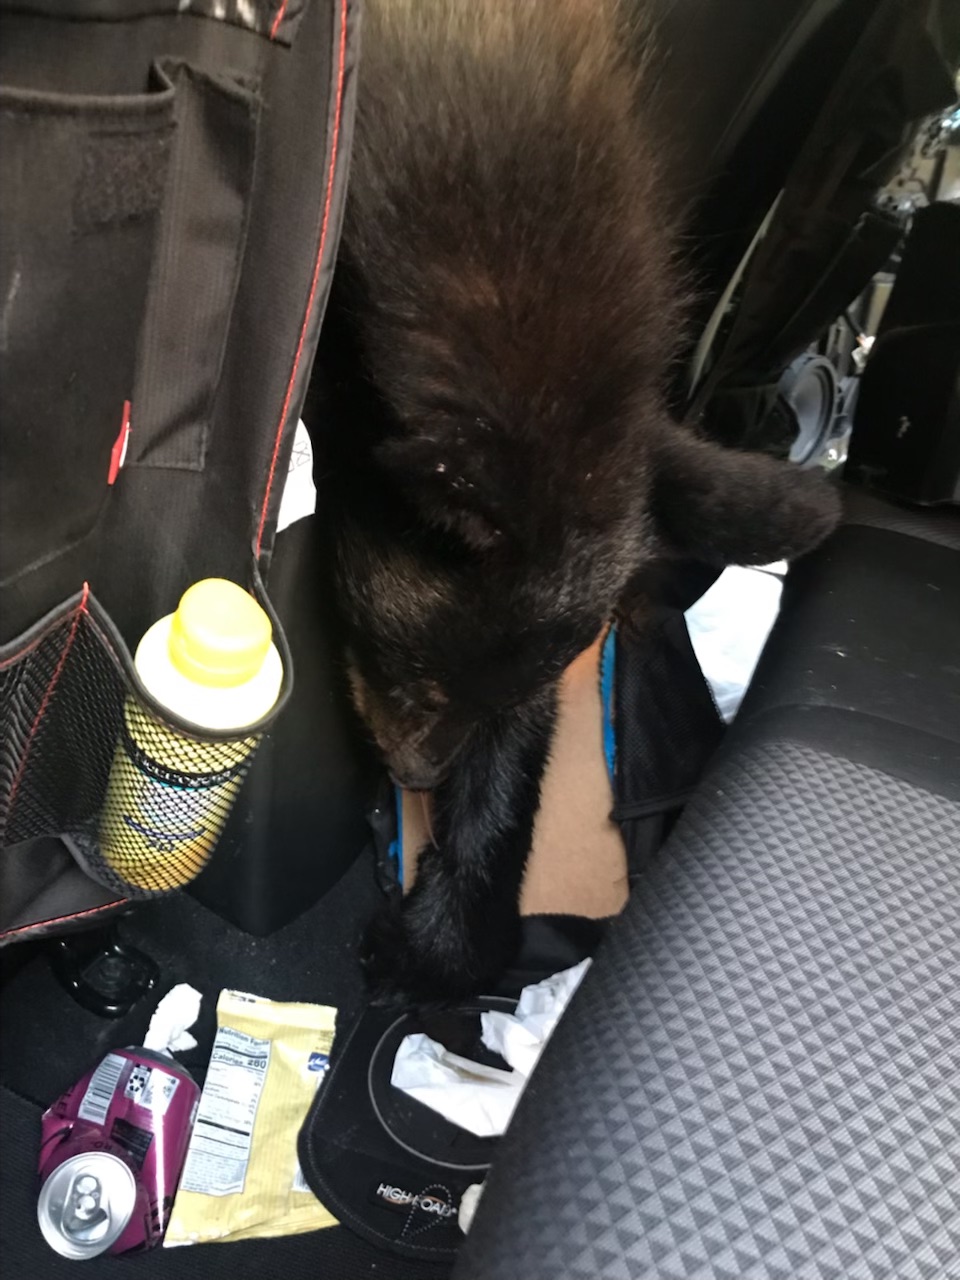 A photograph of the deceased bear also shows food and drink containers inside the vehicle.  Image: TWRA